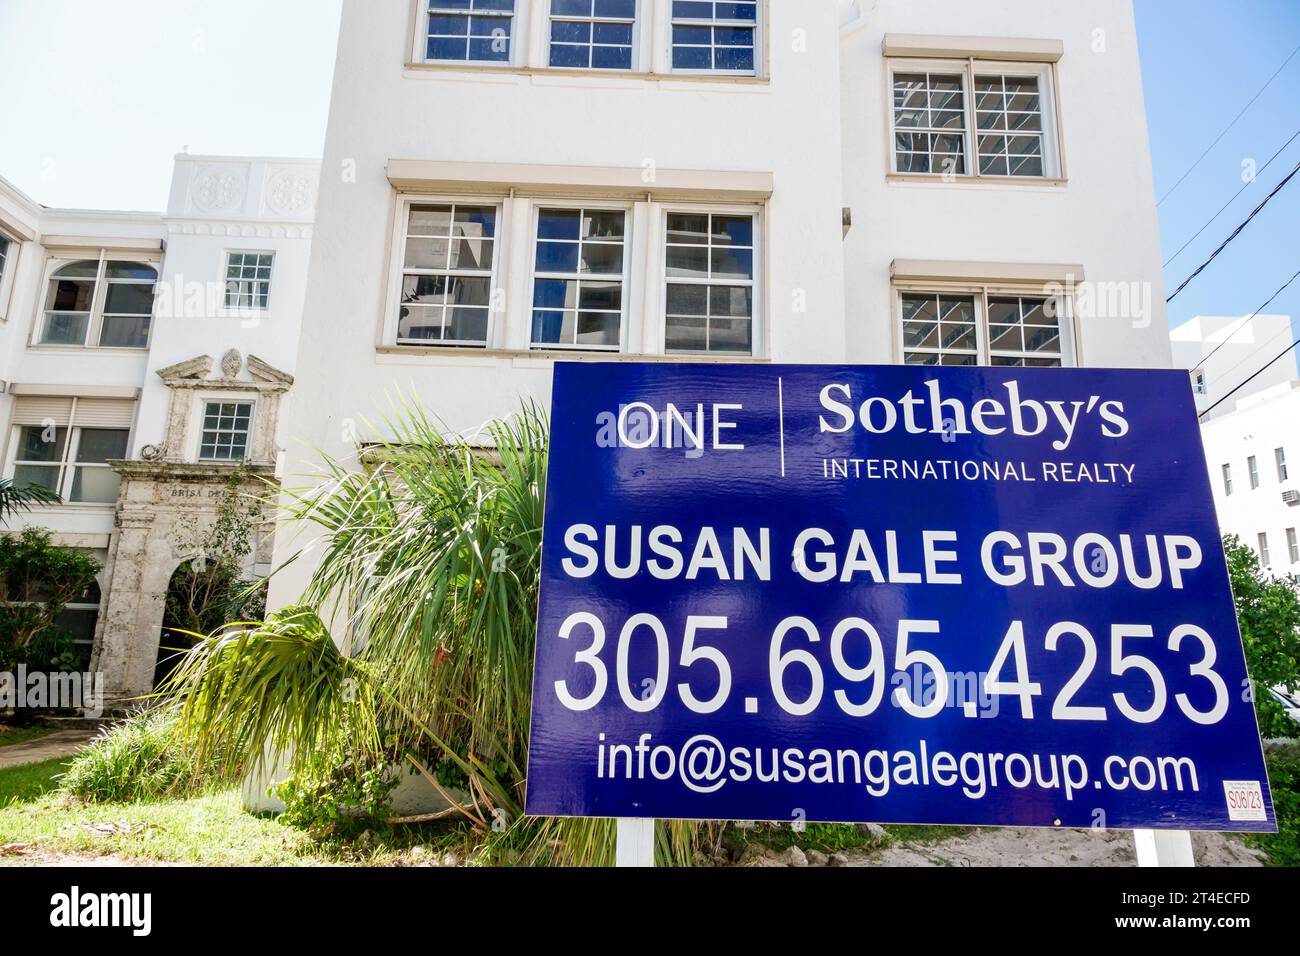 Miami Beach Florida,outside exterior,building front entrance hotel,Collins Avenue,Sotheby's International Realty real estate sign,property for sale Stock Photo